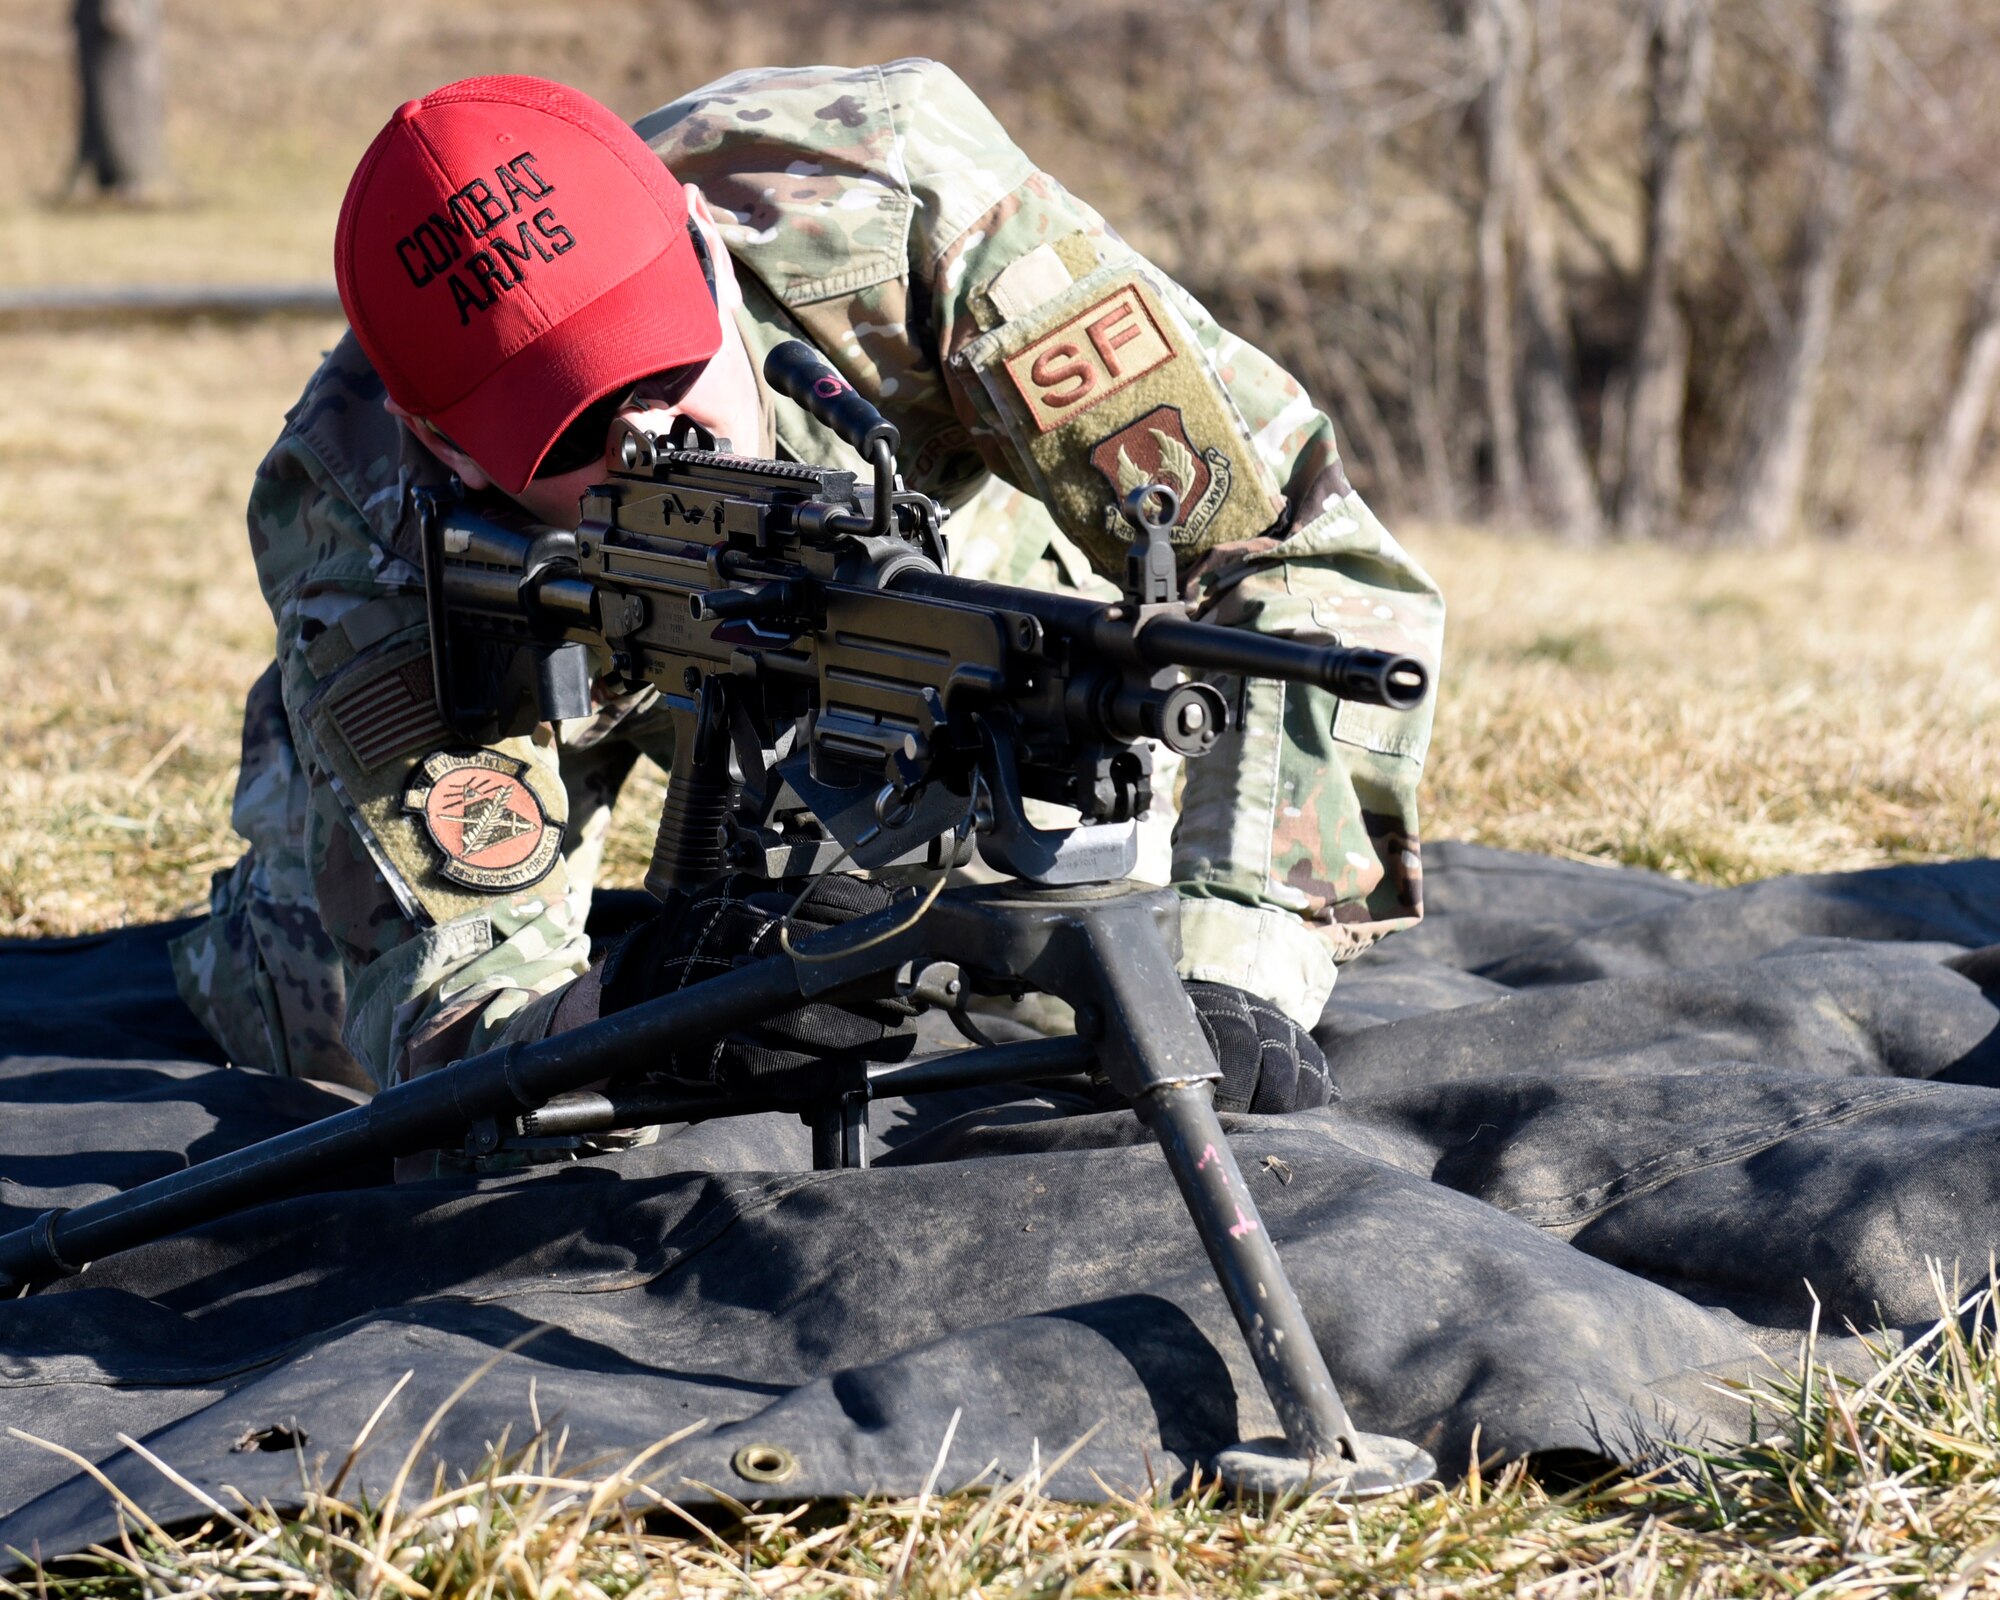 Air Force Staff Sgt. Sawyer McIntyre, an 88th Security Forces Squadron combat arms instructor, sights an M240B machine gun at Camp Atterbury in Edinburgh, Indiana, on Feb. 25, 2021. 88th SFS combat arms instructors, from Wright-Patterson Air Force Base, Ohio, travel to Camp Atterbury multiple times each year for readiness and qualification training with deployers on machine guns and grenade launchers. (U.S. Air Force photo by Ty Greenlees)